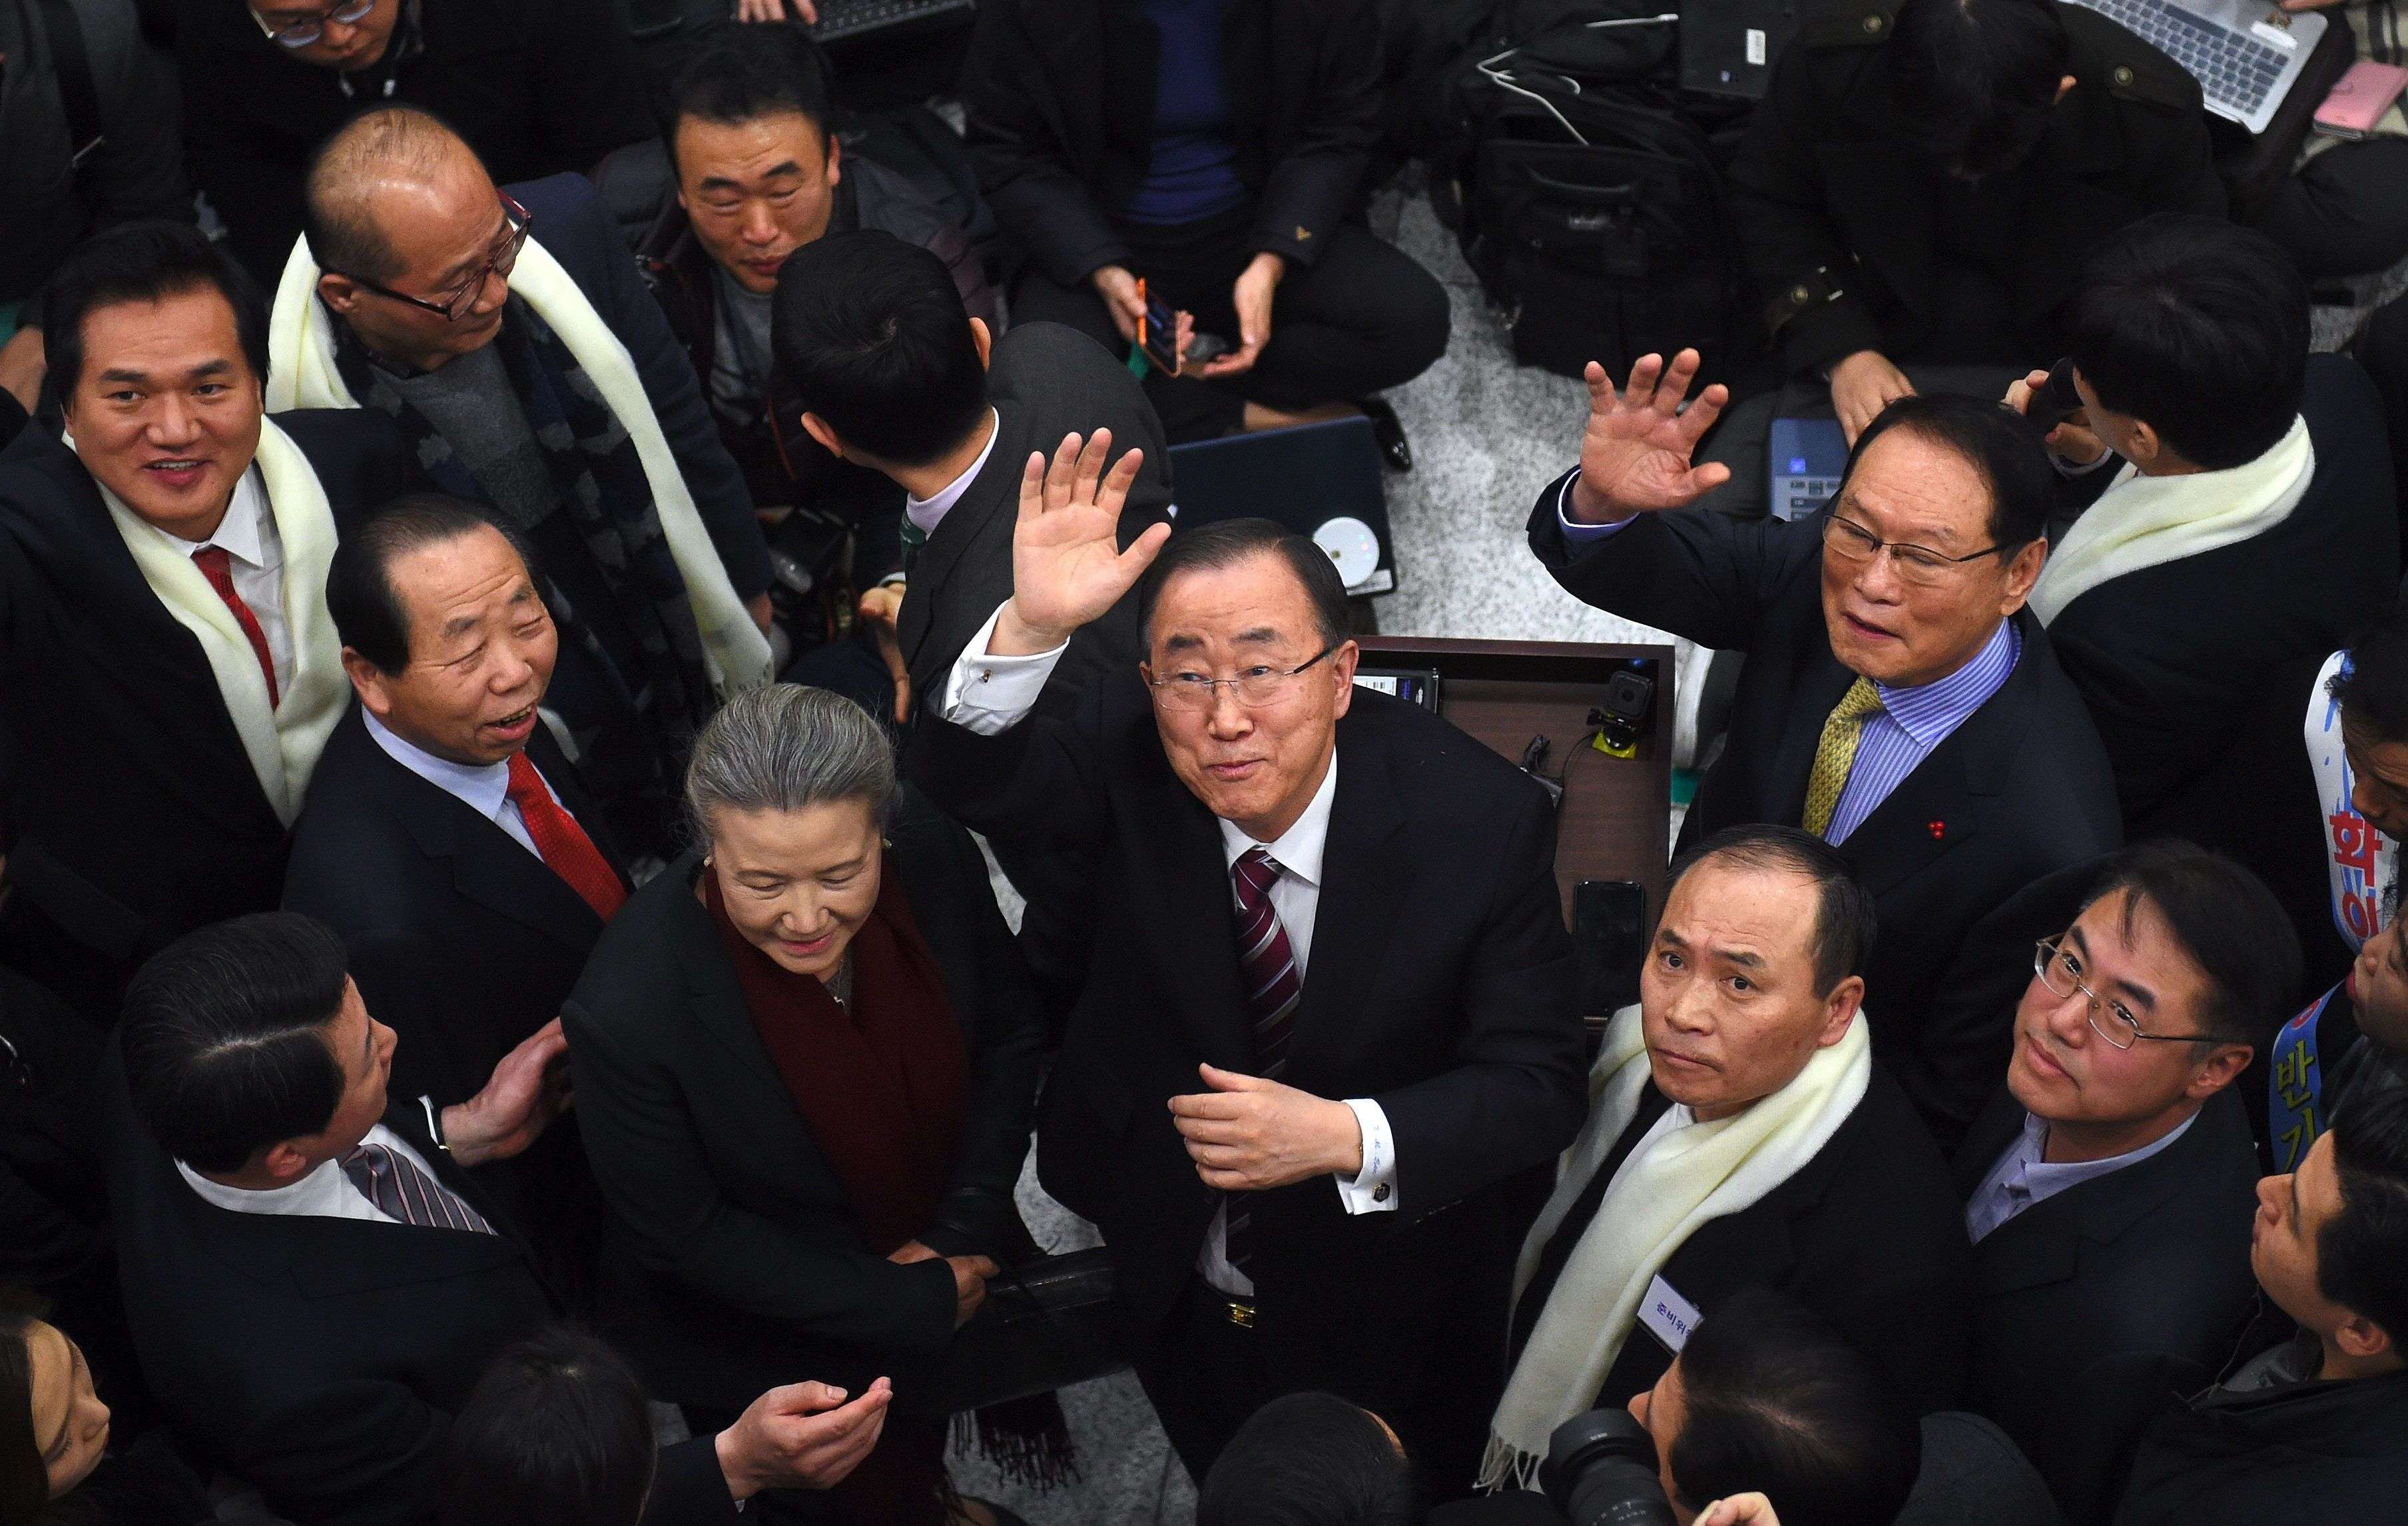 Former UN secretary general Ban Ki-moon waves as he arrives at the Incheon International Airport. Photo: AFP